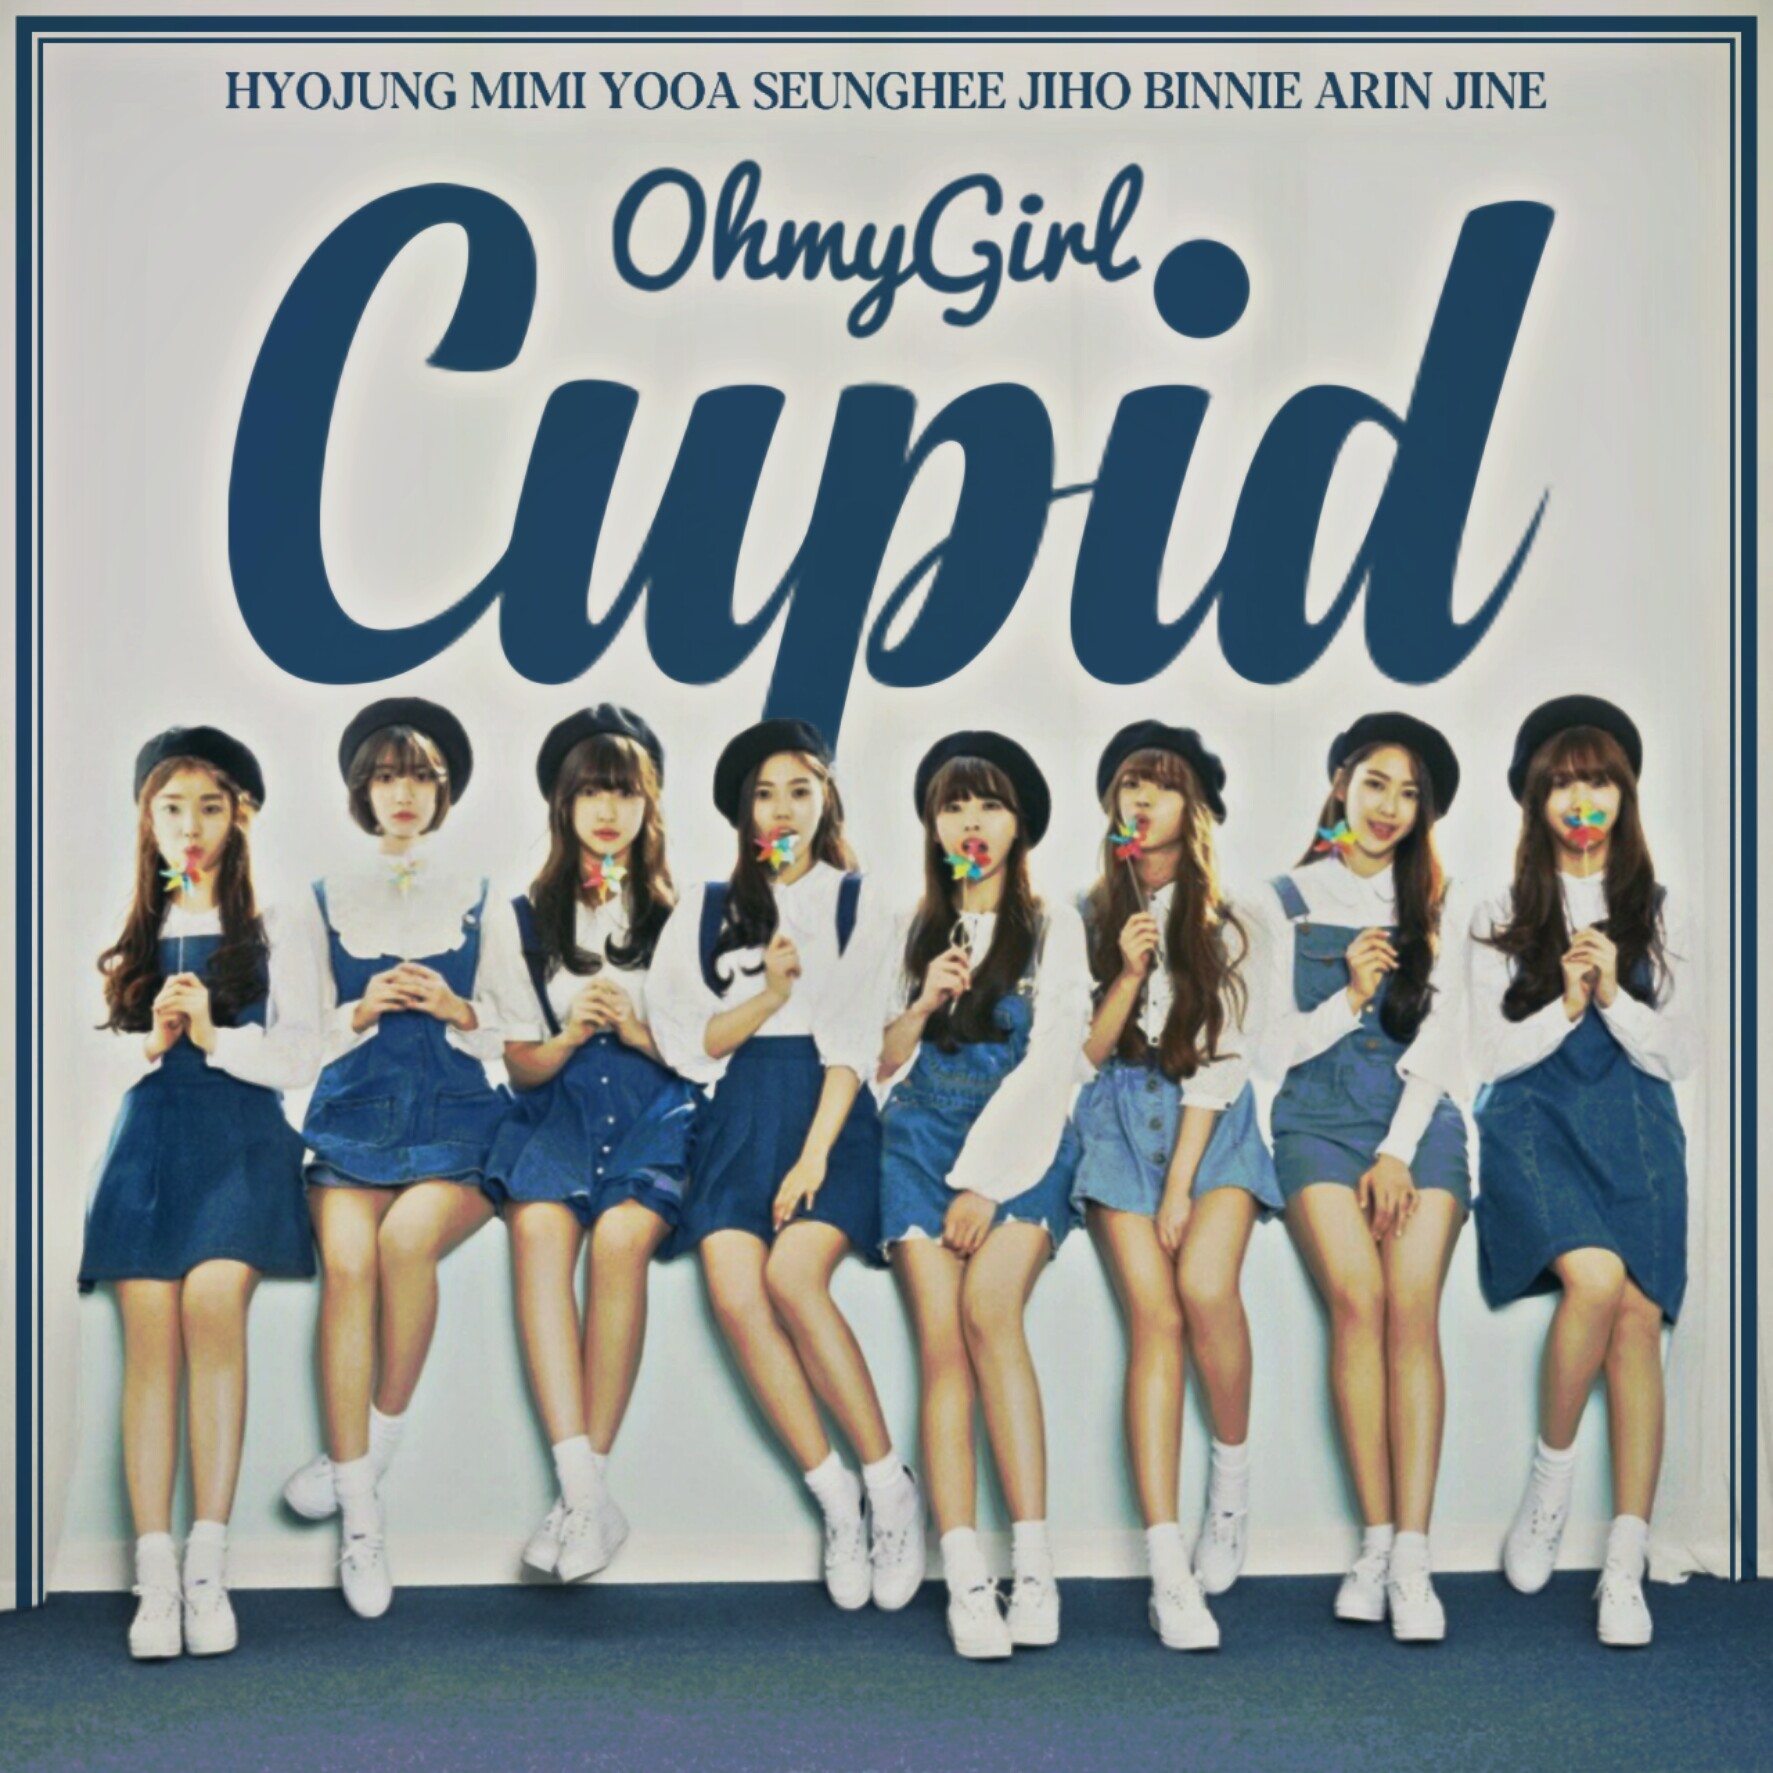 OH MY GIRL CUPID / OH MY GIRL album cover by LEAlbum on DeviantArt